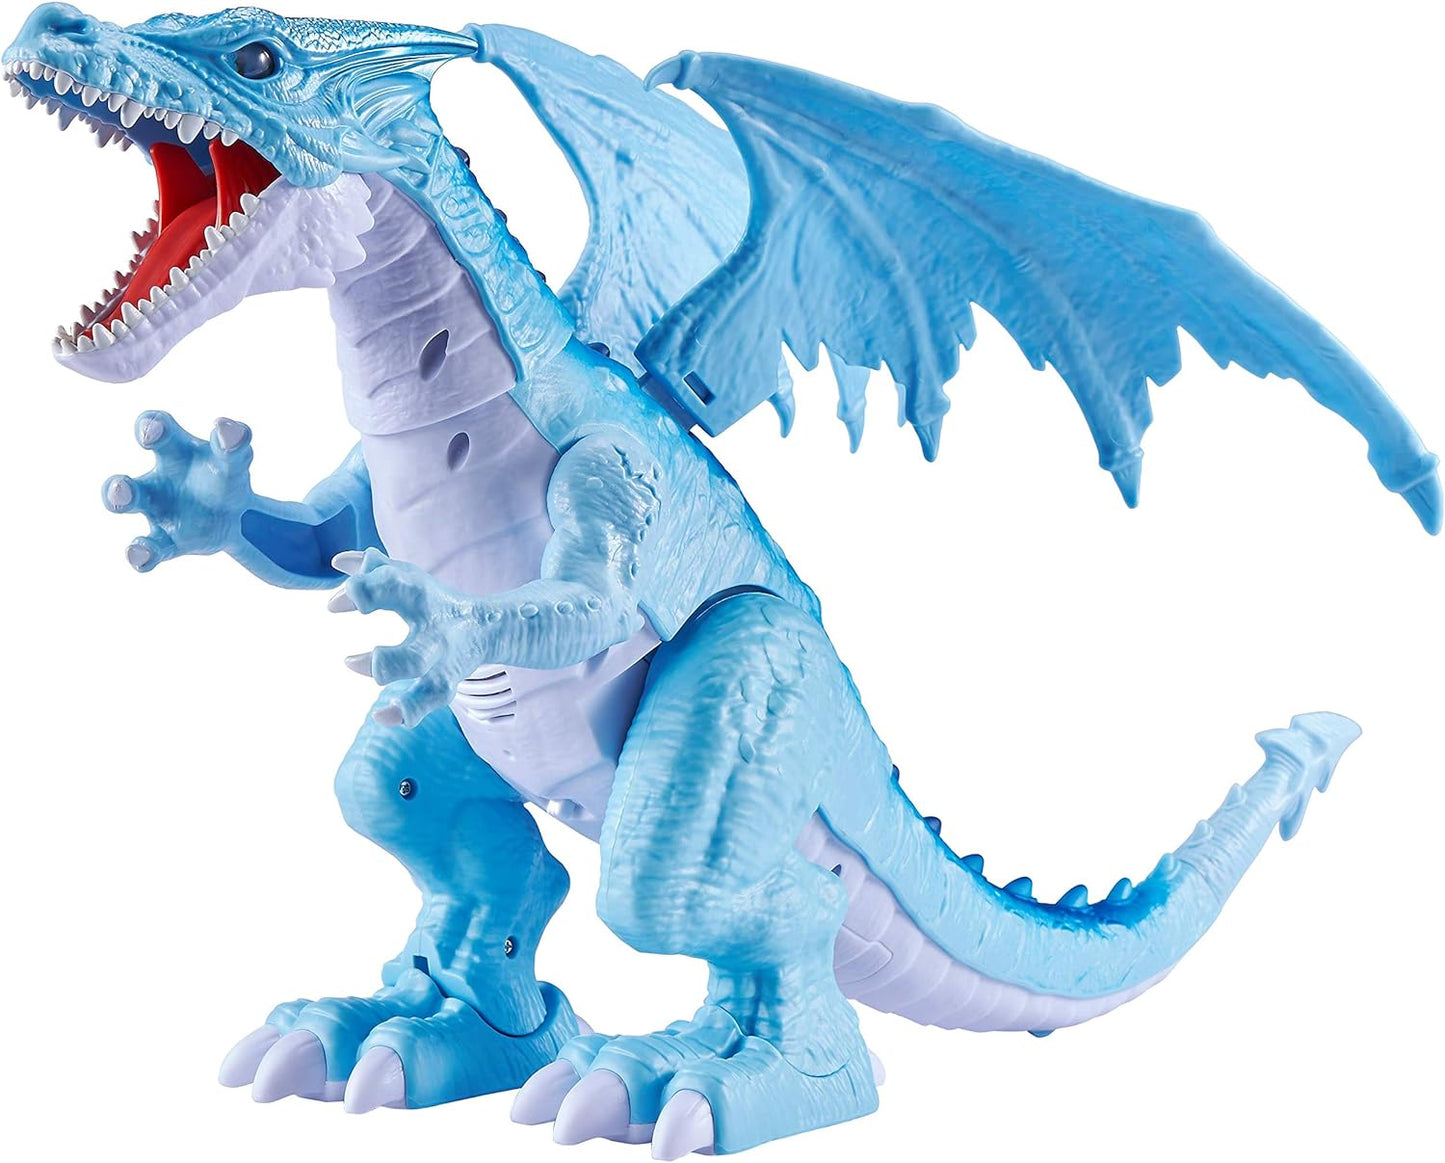 Robo Alive Interactive Fire Breathing Roaring Dragon By ZURU (Colors Vary)